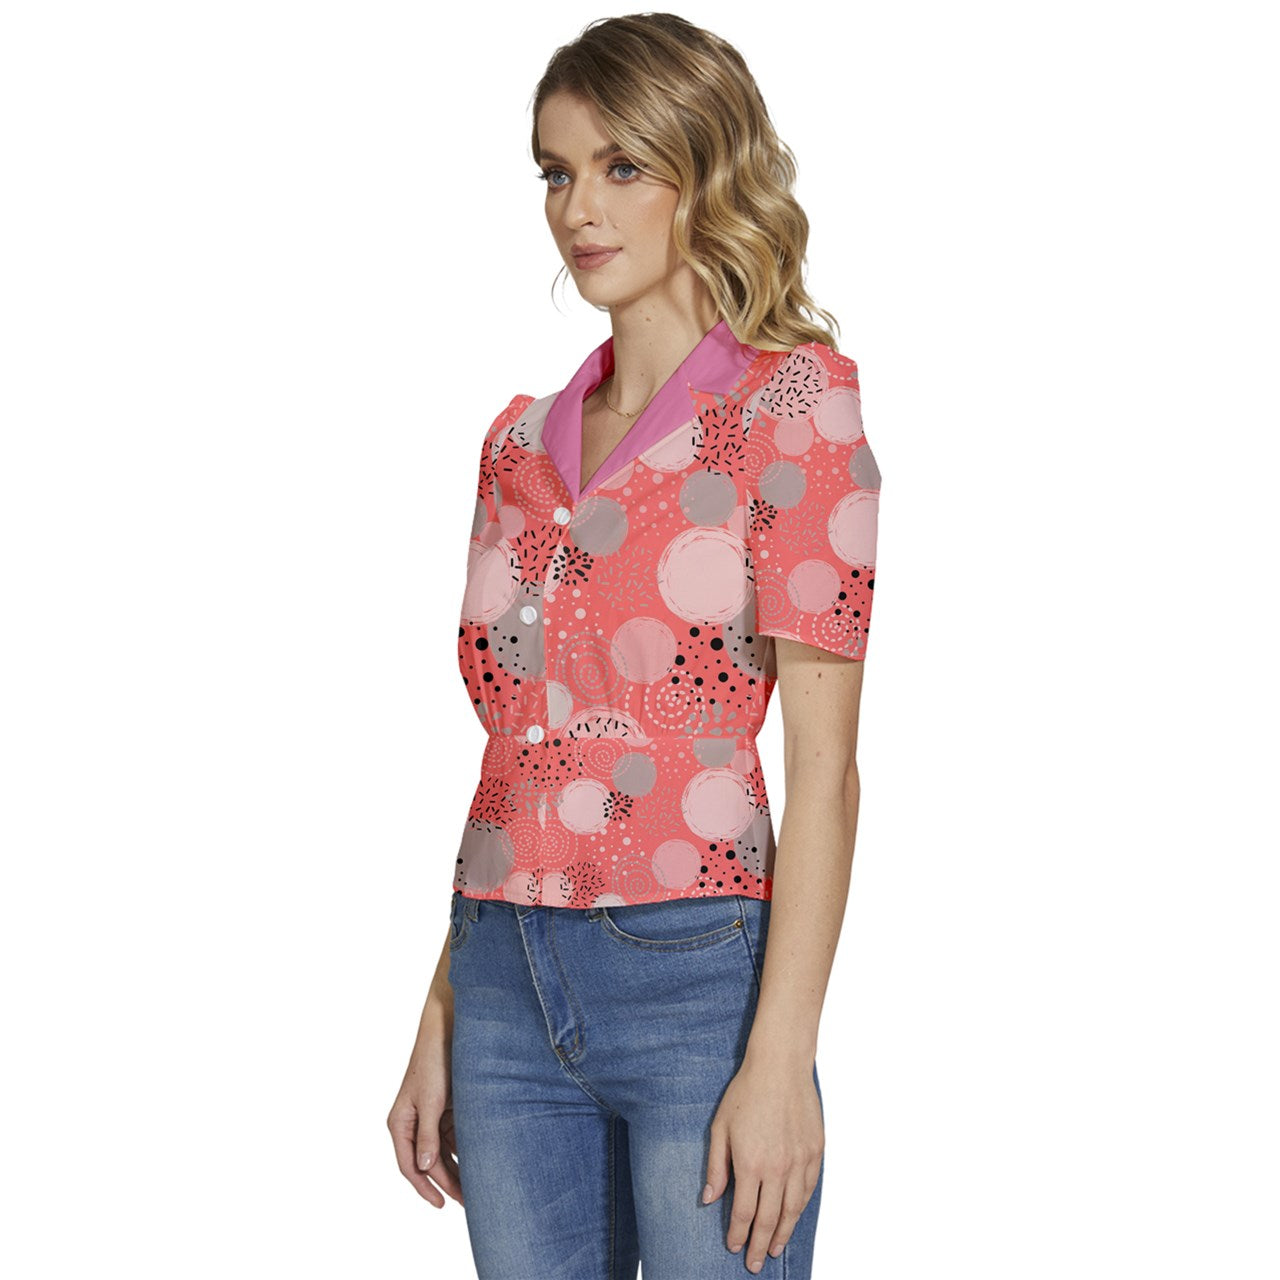 Miami Puffed Short Sleeve Button Up Jacket